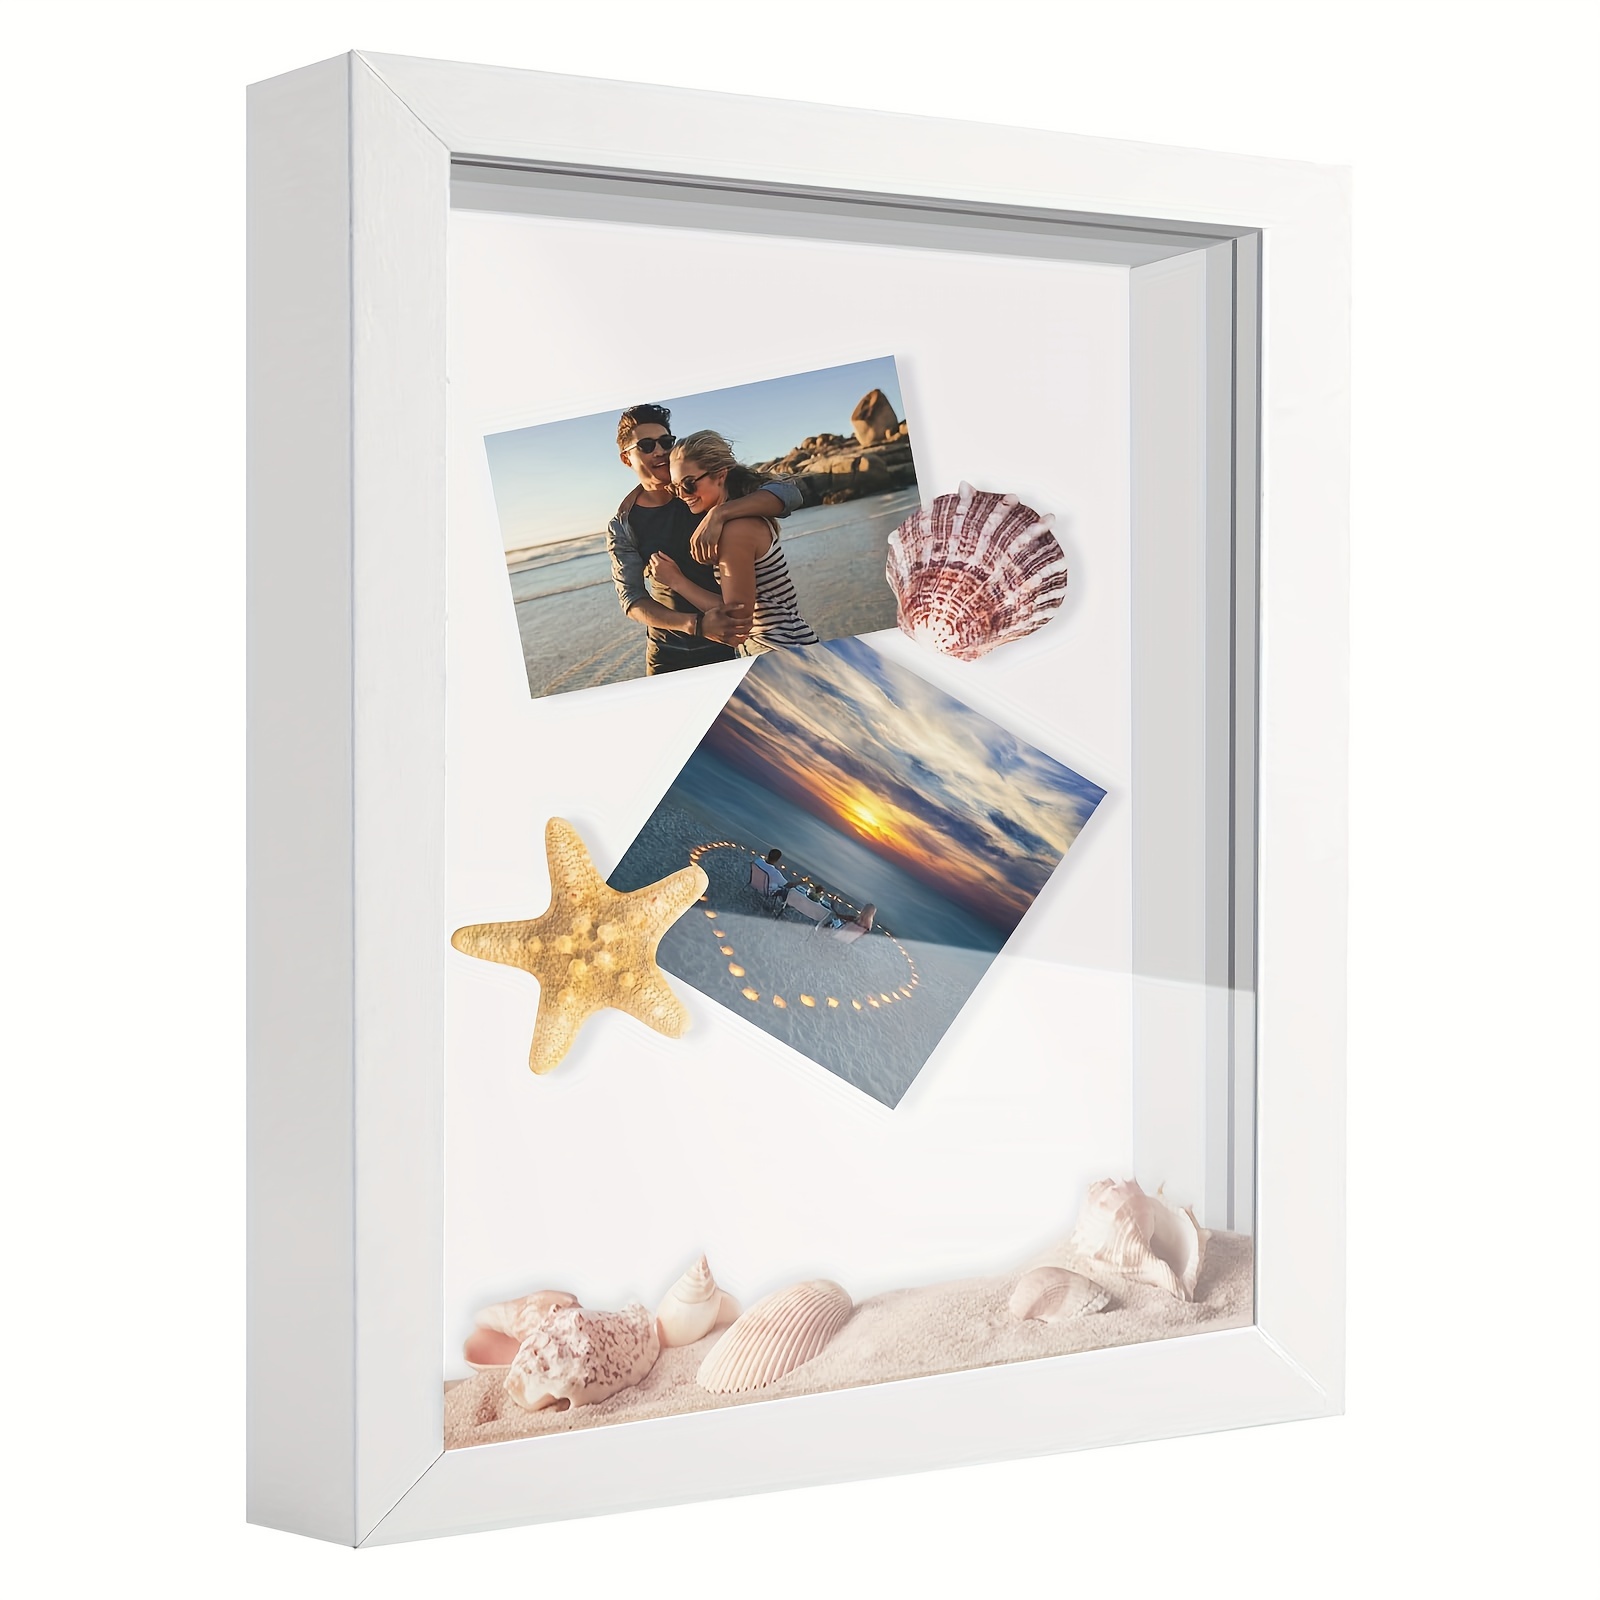 TouYinger 8x8 Shadow Box Frame Display Case with Letter Stickers, 3D  Picture Frame, Display Case Box for Memorabilia, Baby Items, Wedding  Memories, Crafts, Tickets and Photos (White, 8x8)